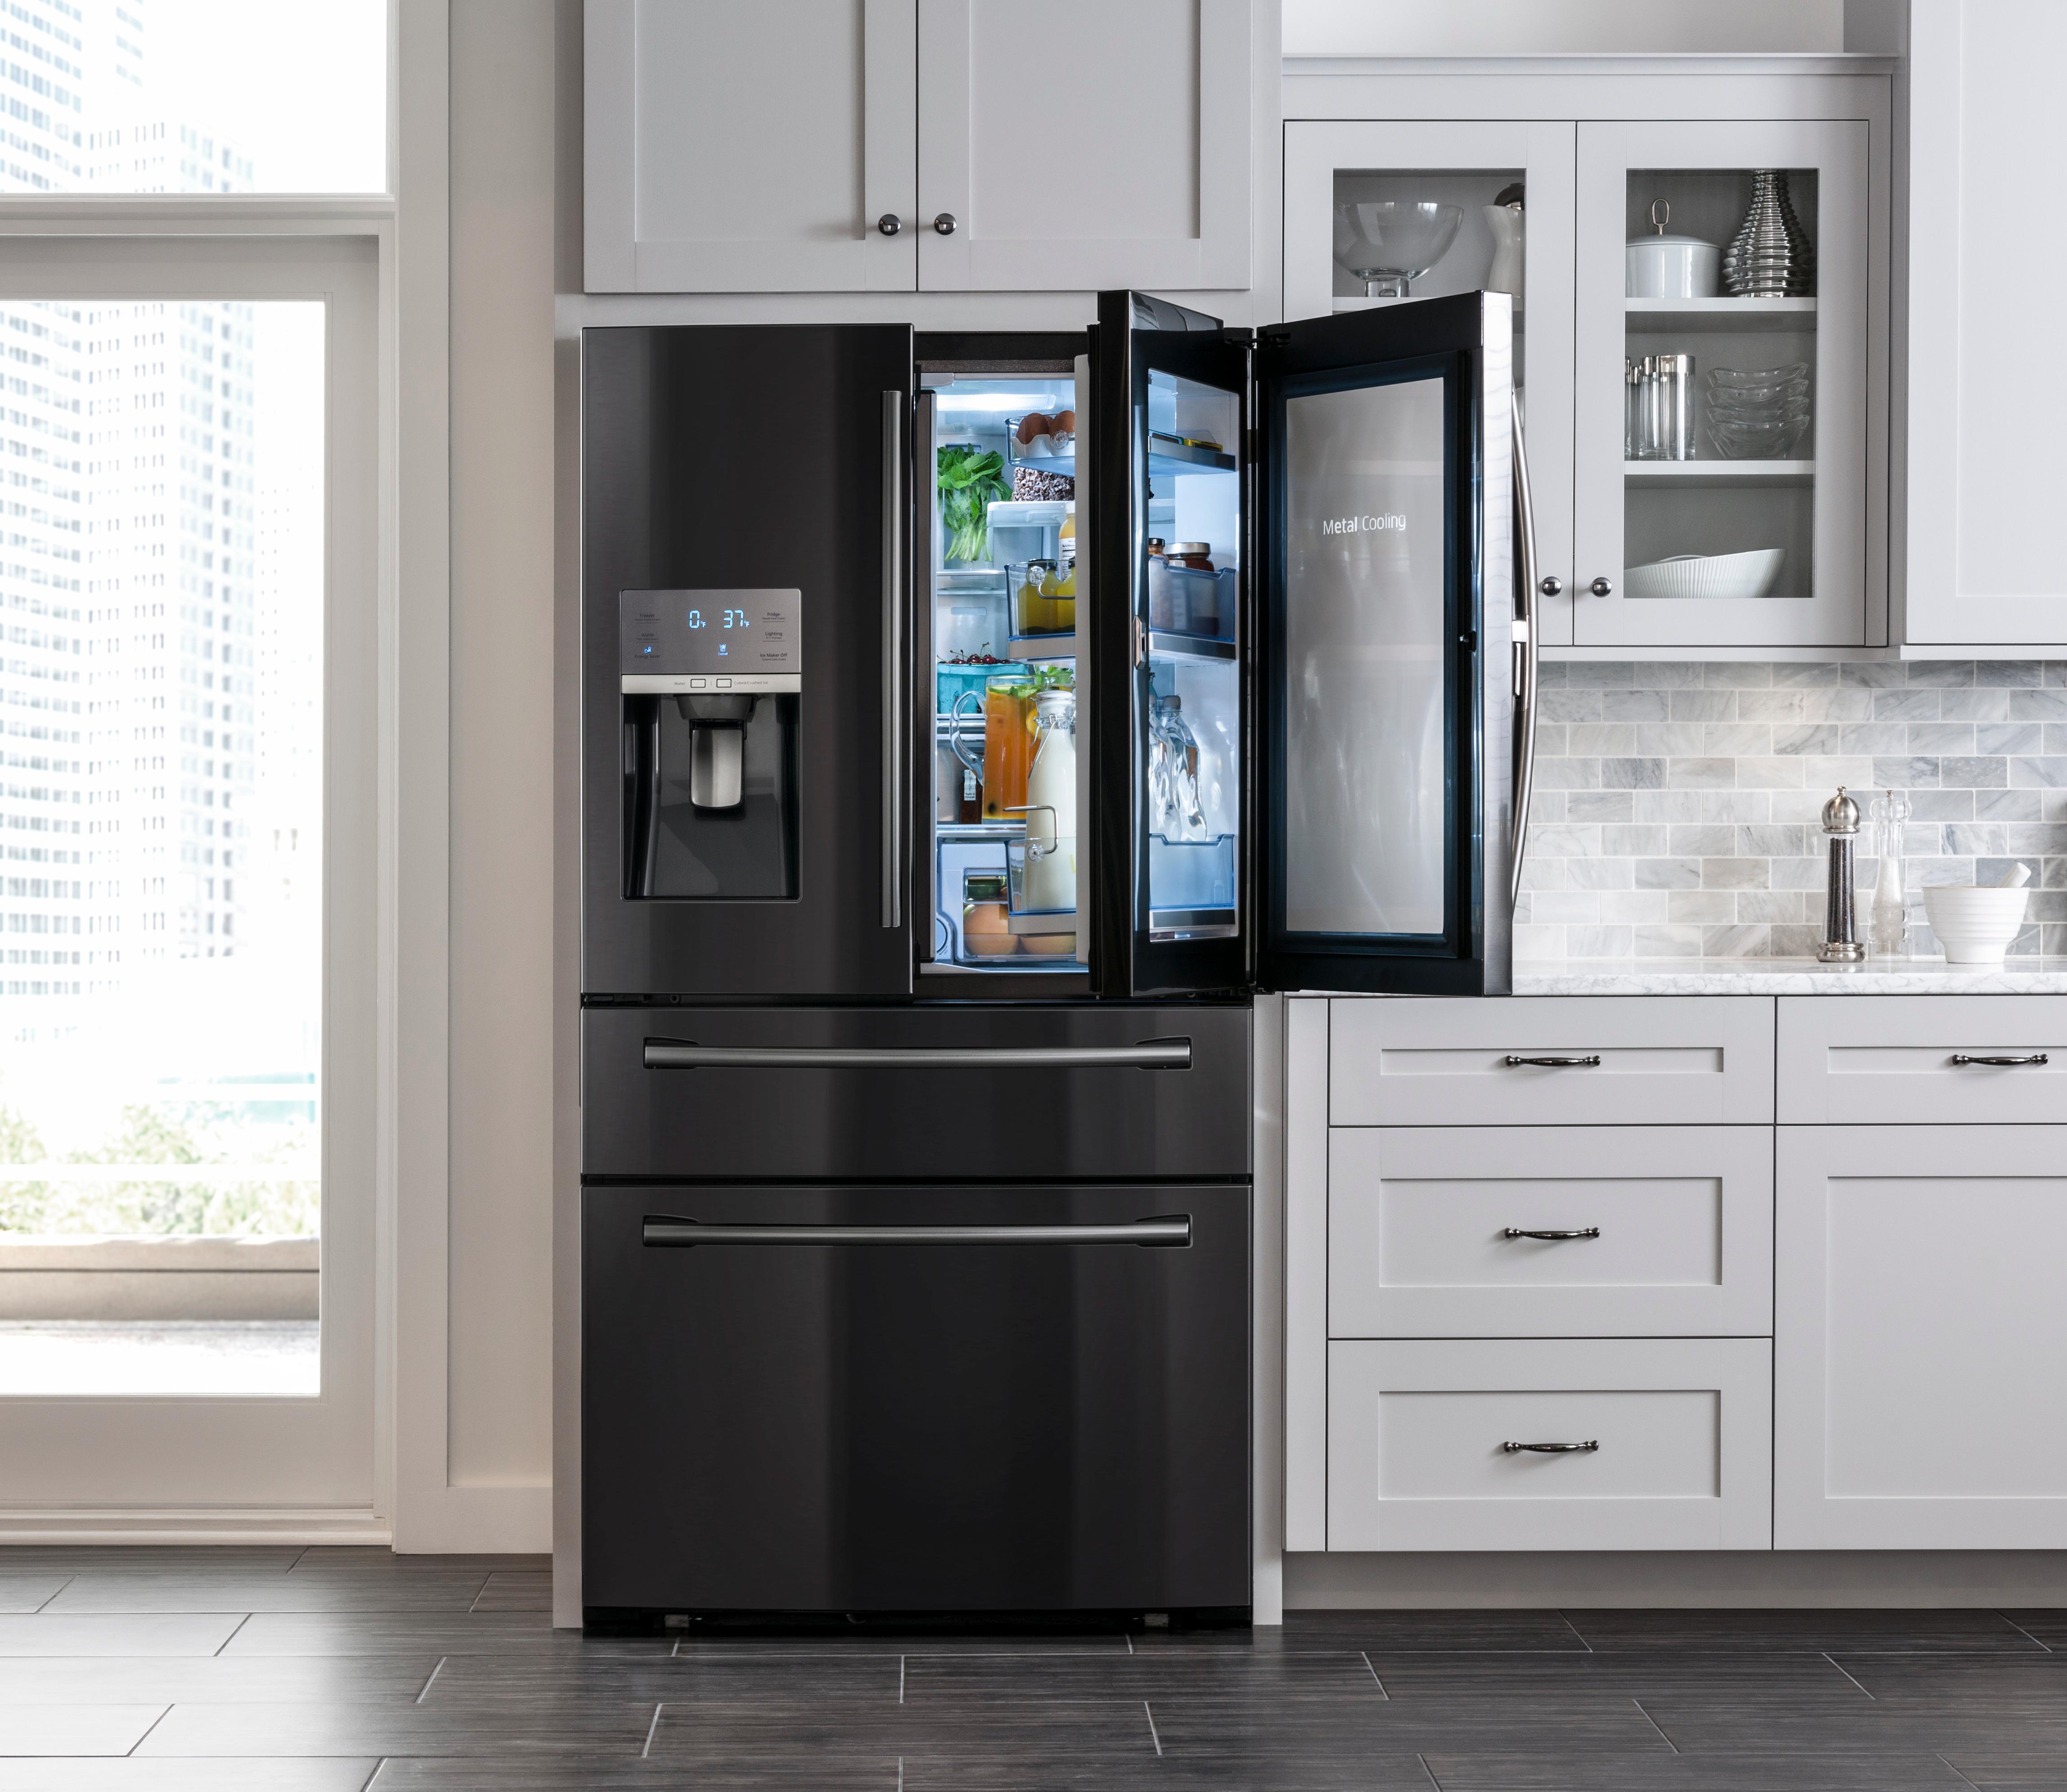 Remodel Your Kitchen with the Appliance Sales Event at Best Buy